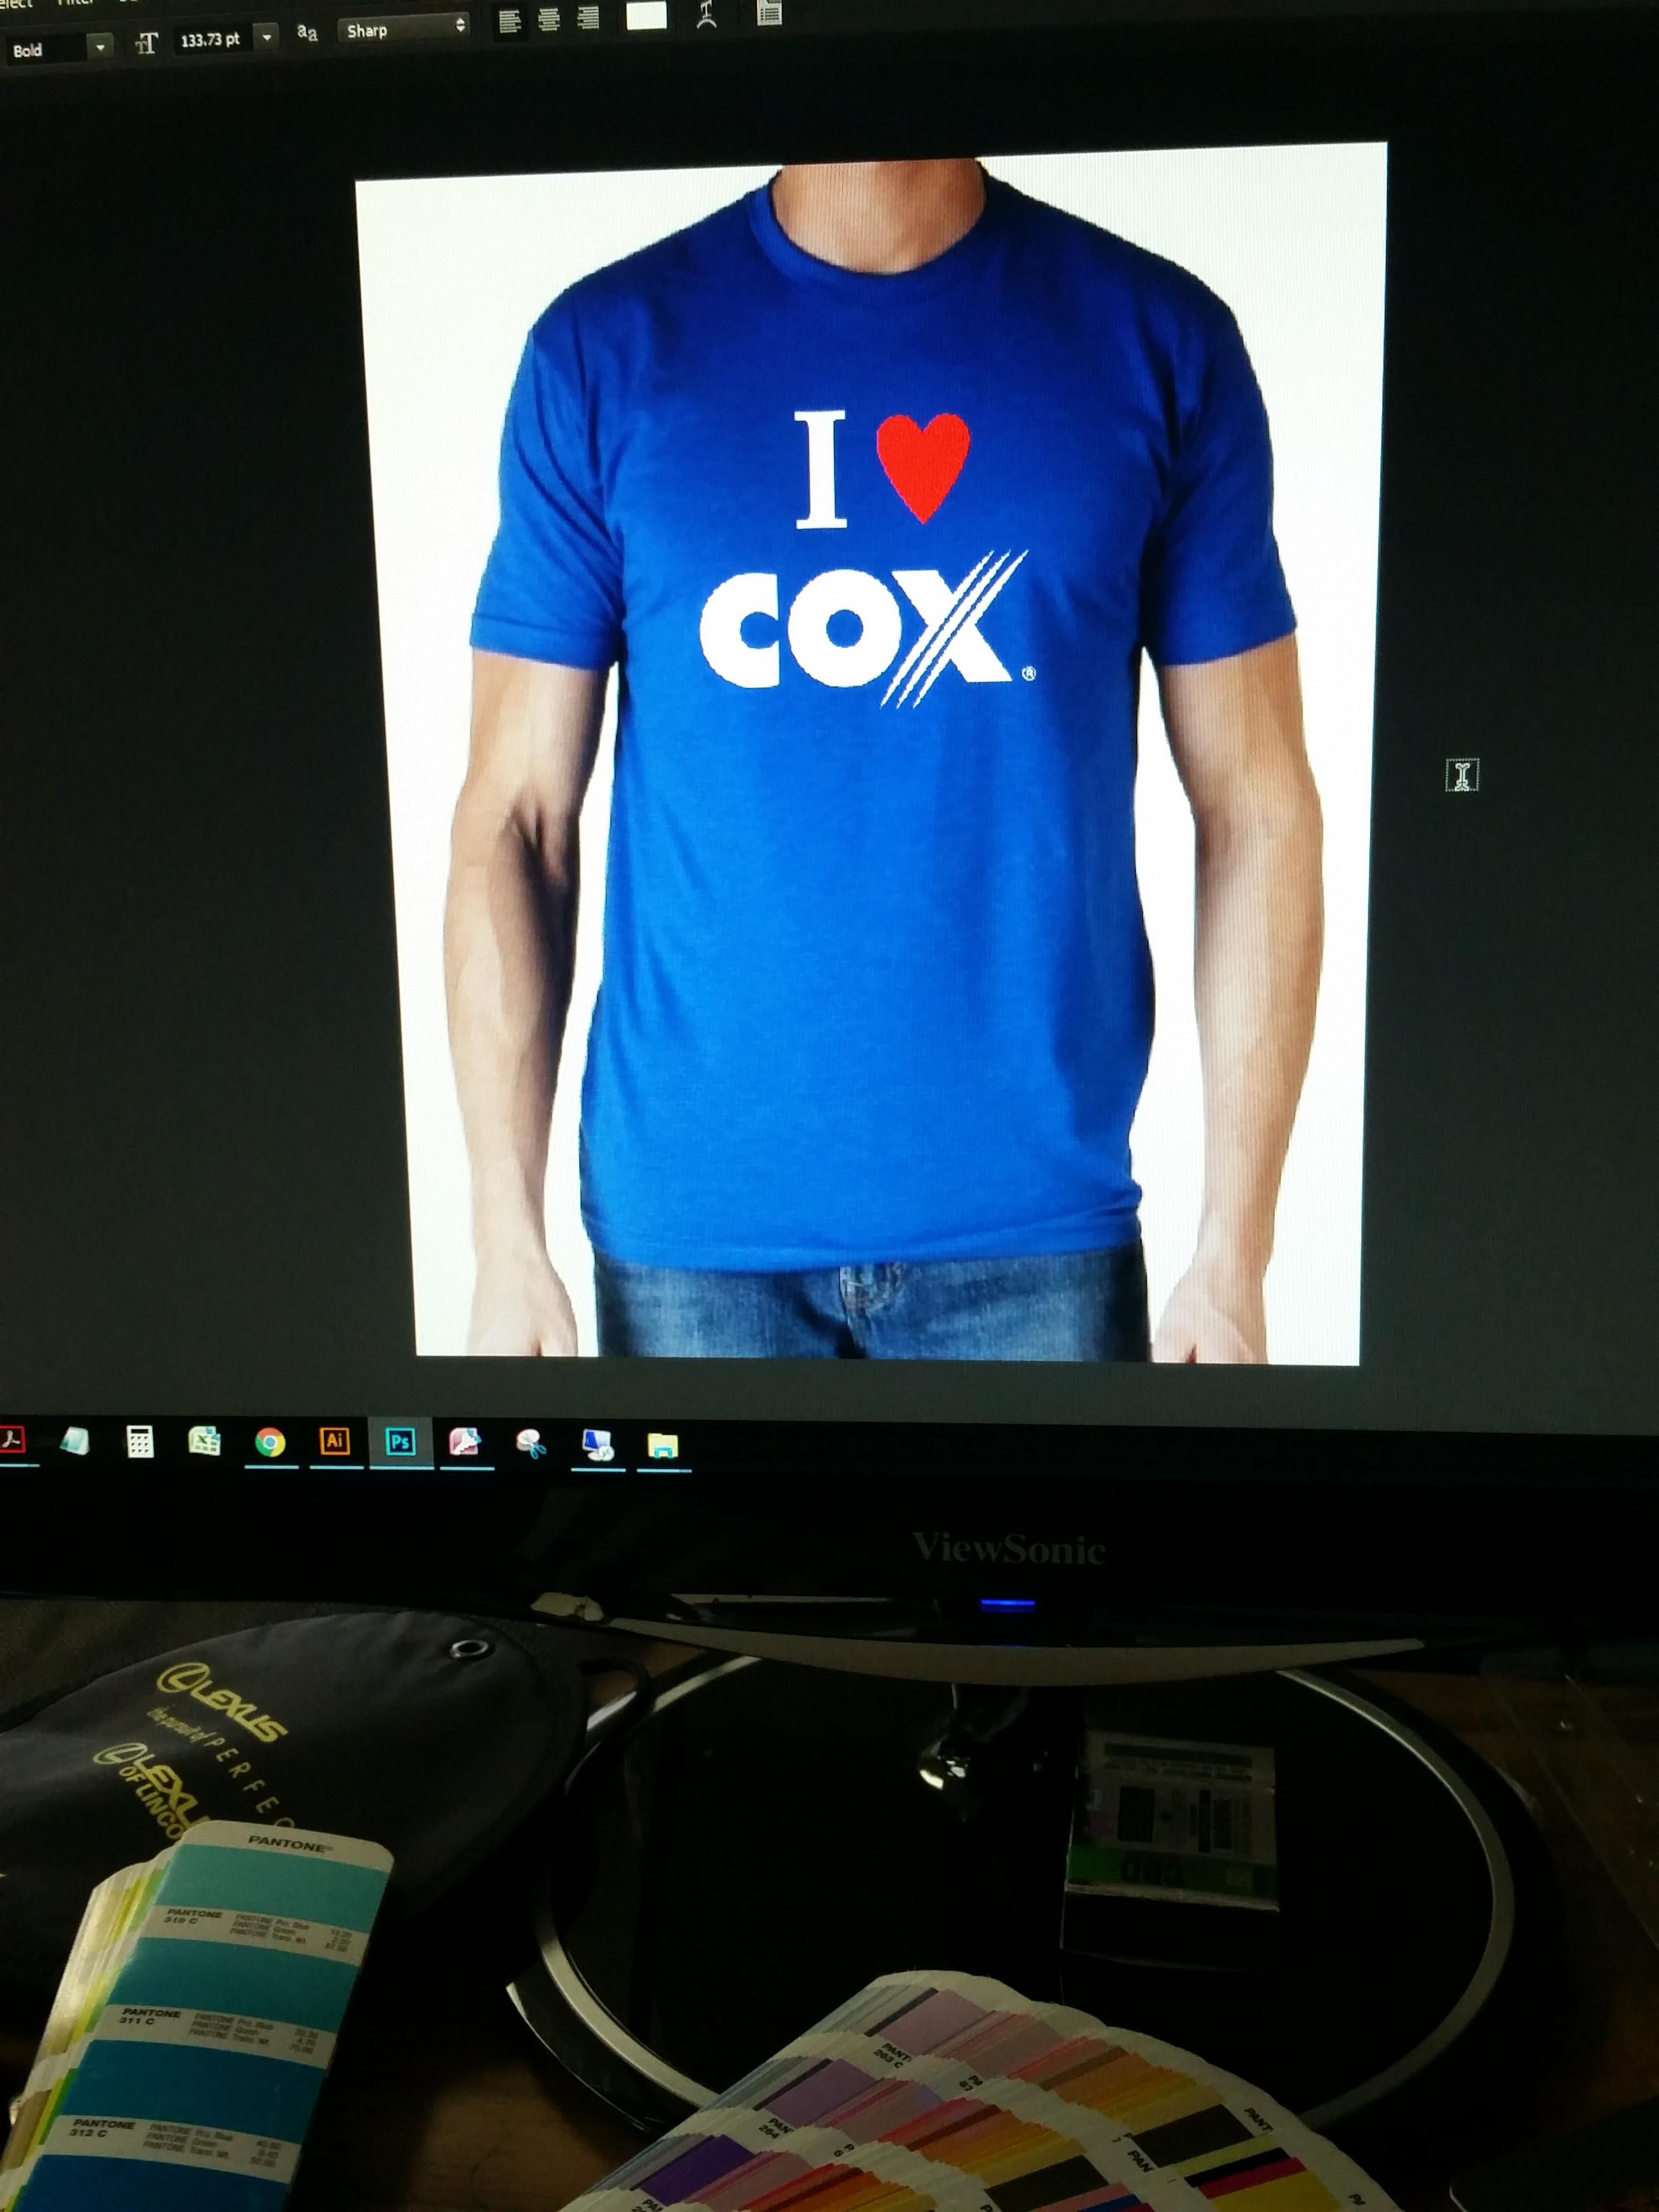 A Local Cox Cable installer contractor ordered some shirts for his employees.. Owners main language is not english..i will laugh when his guys come pick them up tomorrow...